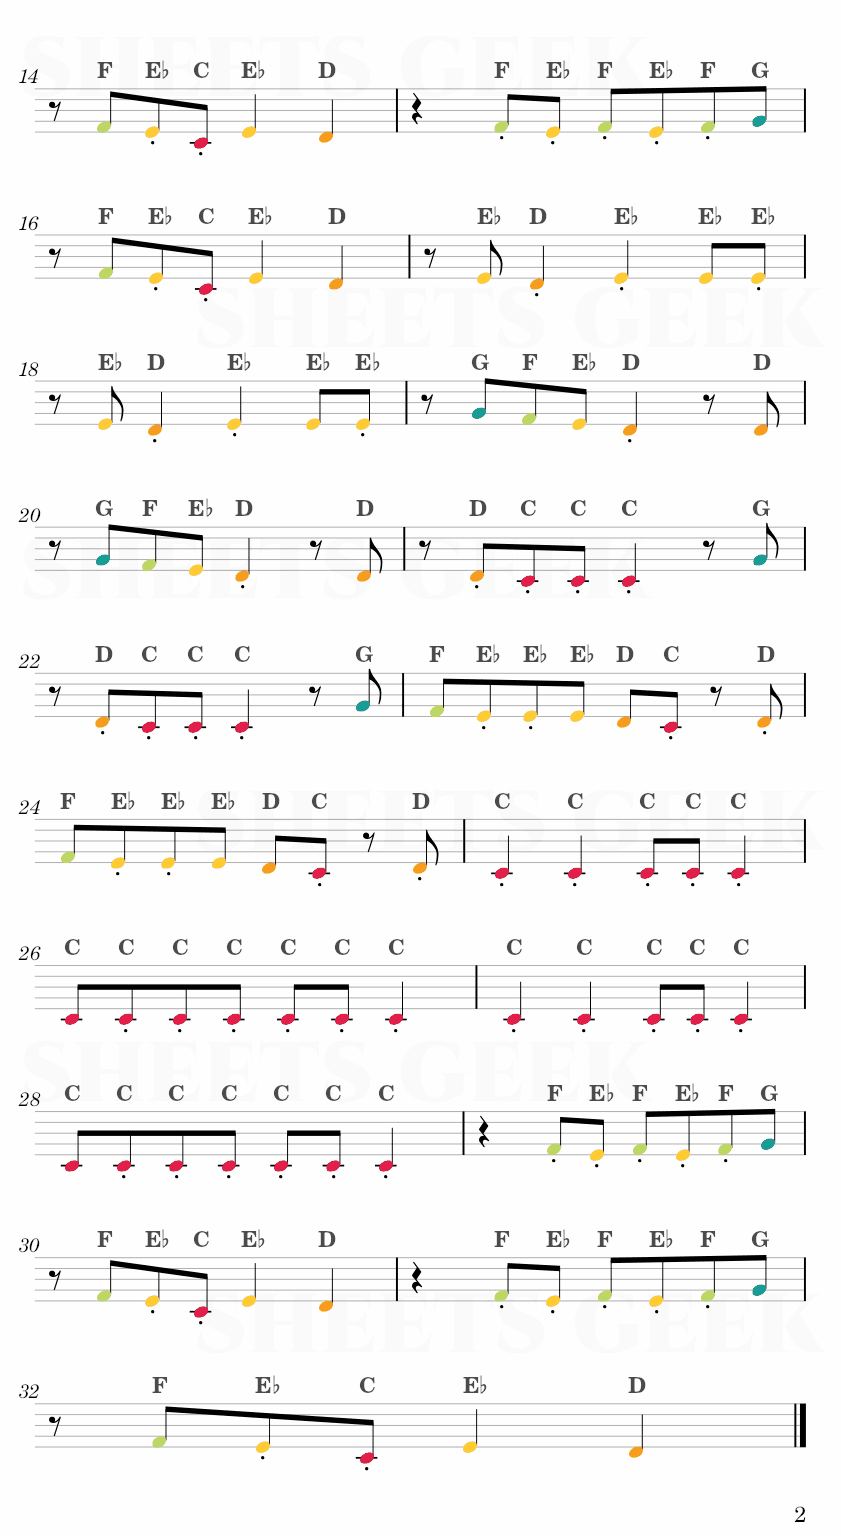 Fresh - Friday Night Funkin' Easy Sheet Music Free for piano, keyboard, flute, violin, sax, cello page 2